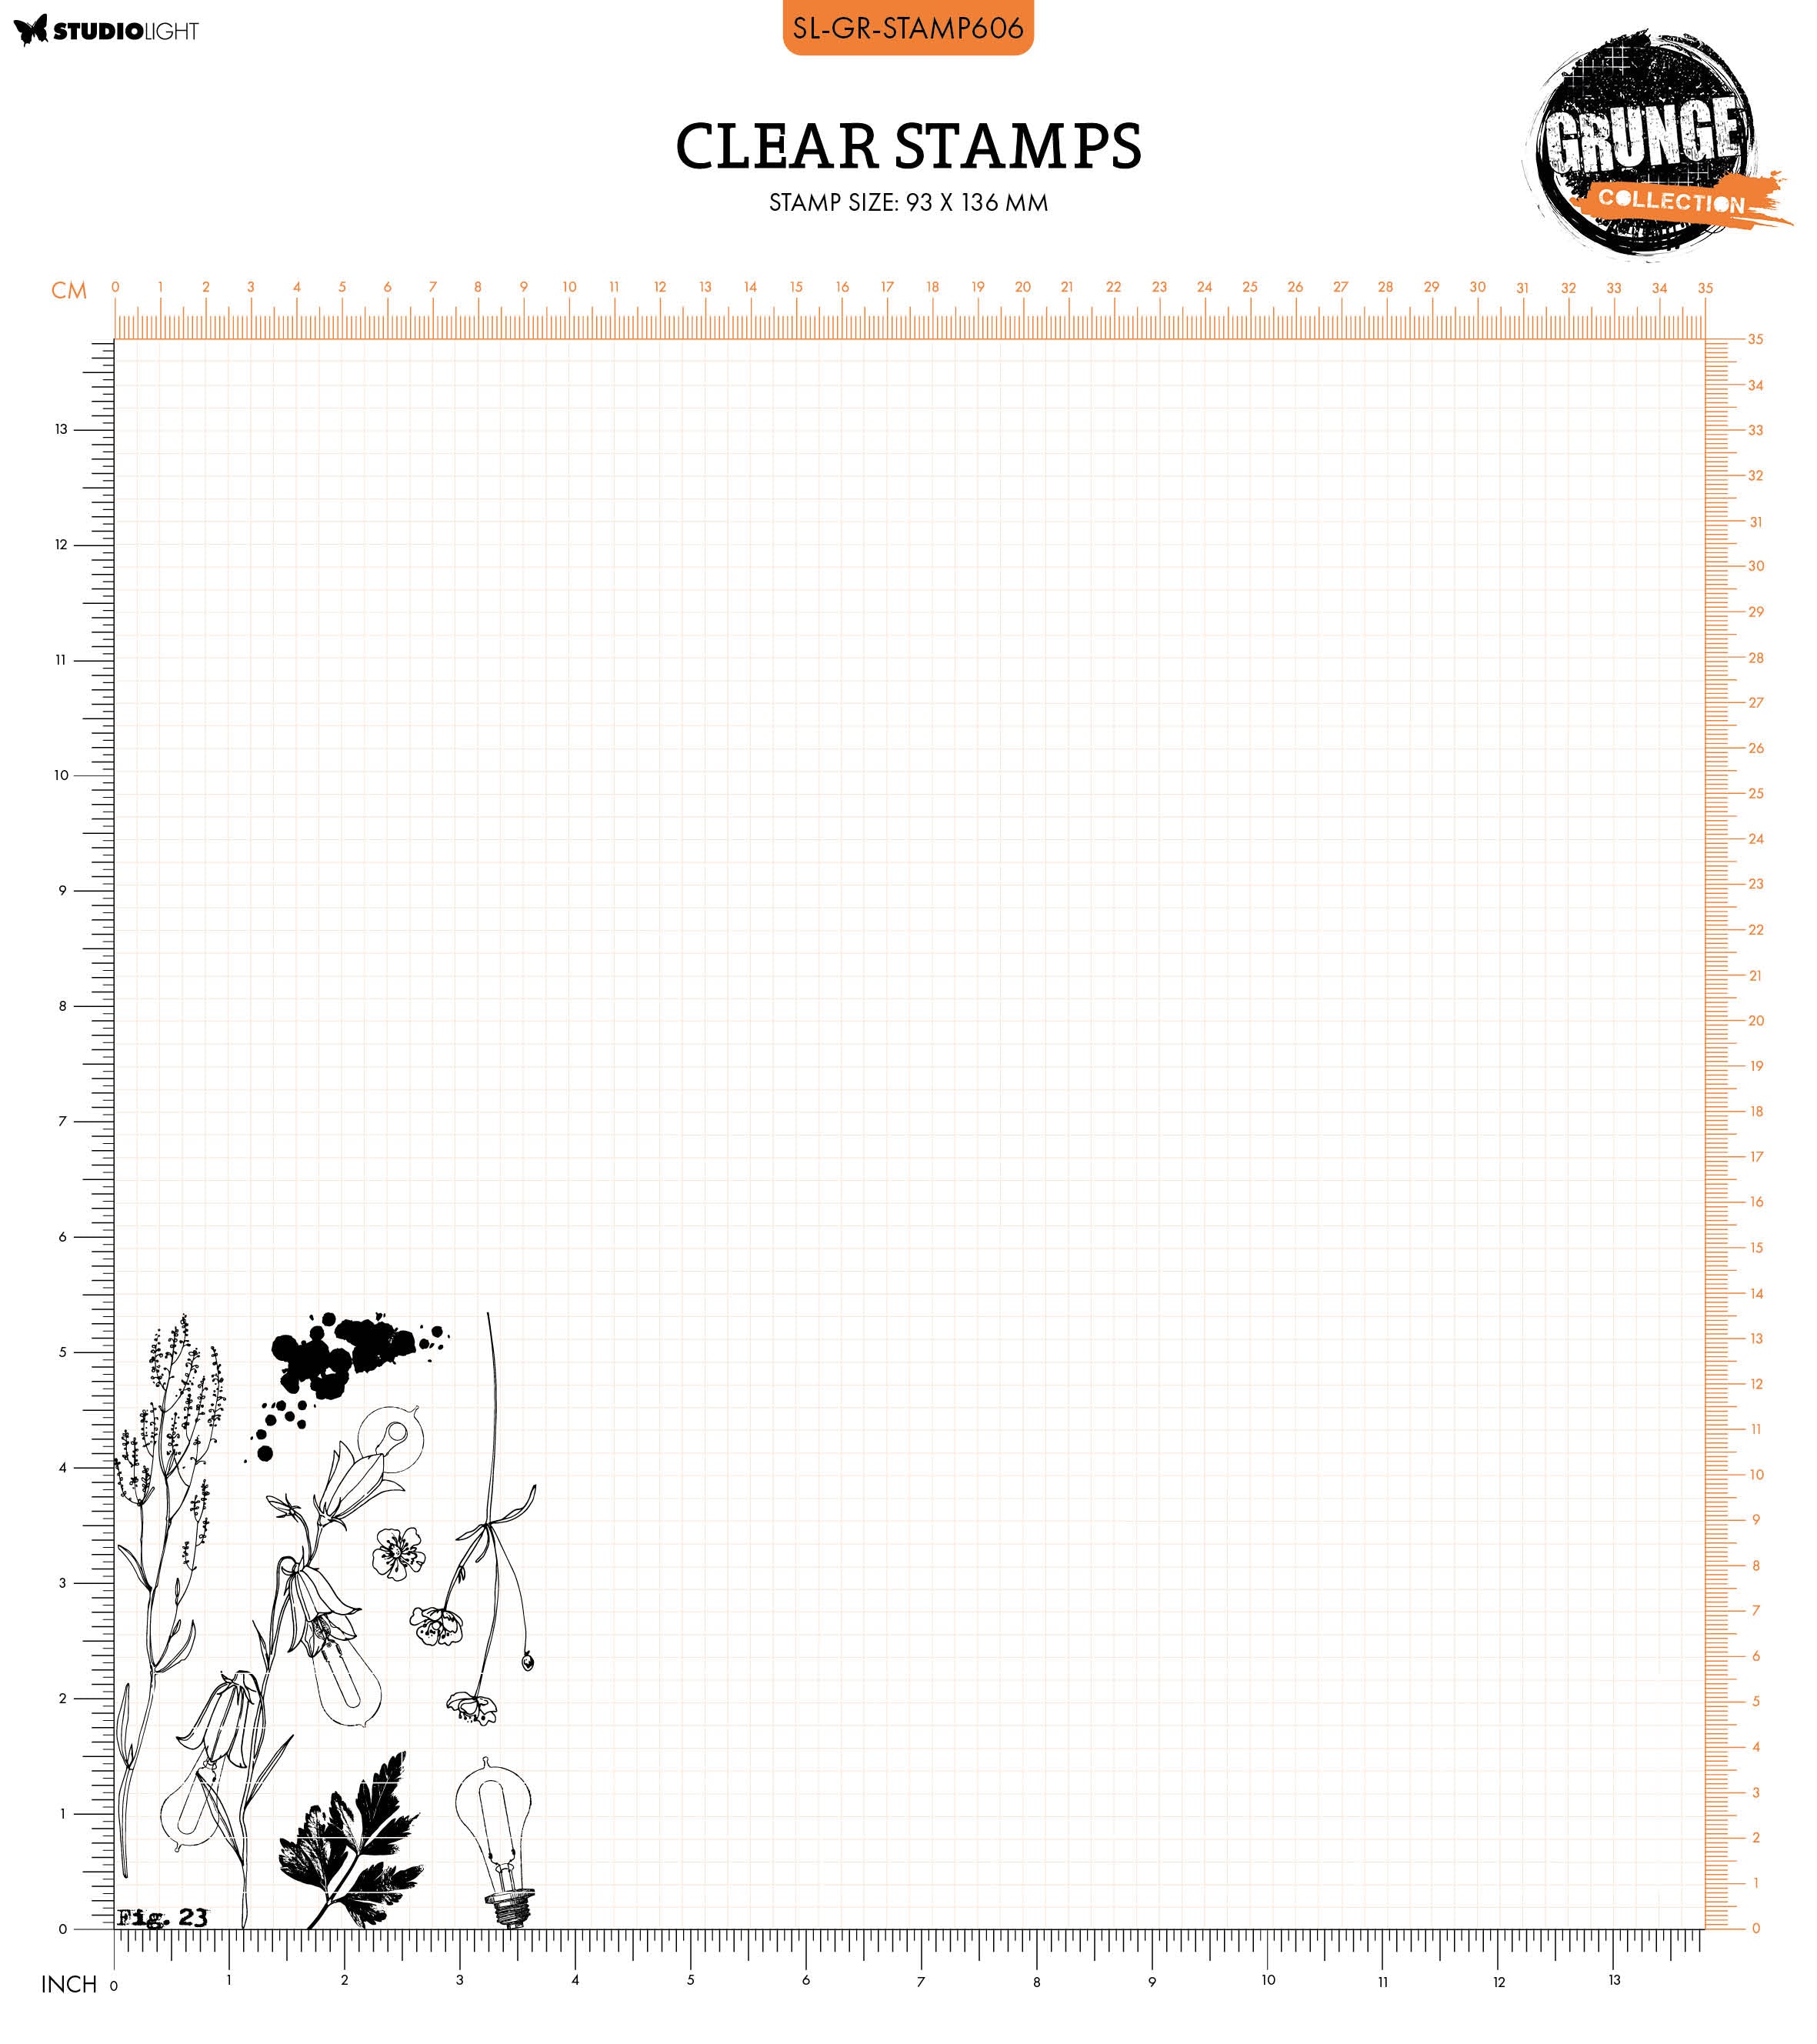 SL Clear Stamp Botanical Elements Grunge Collection 8 PC